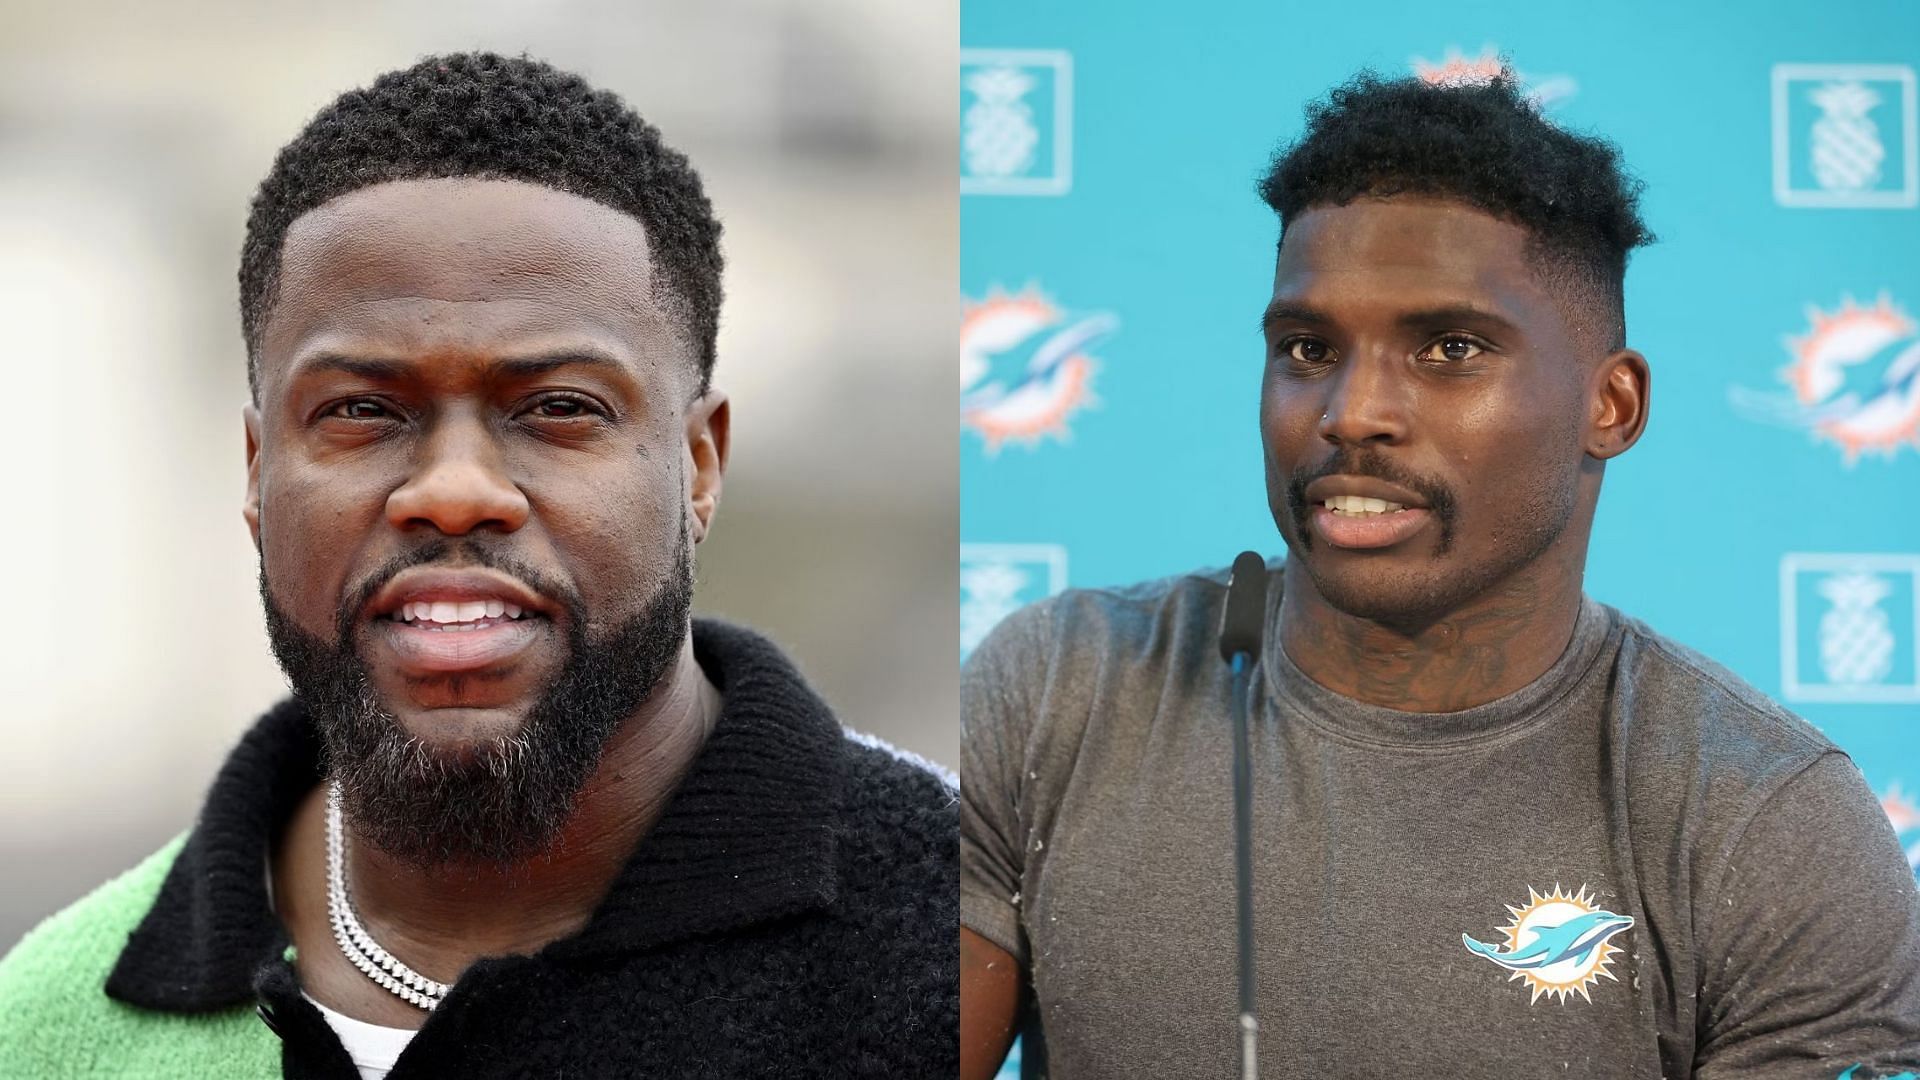 Tyreek Hill gets involved in a scuffle at Kevin Hart